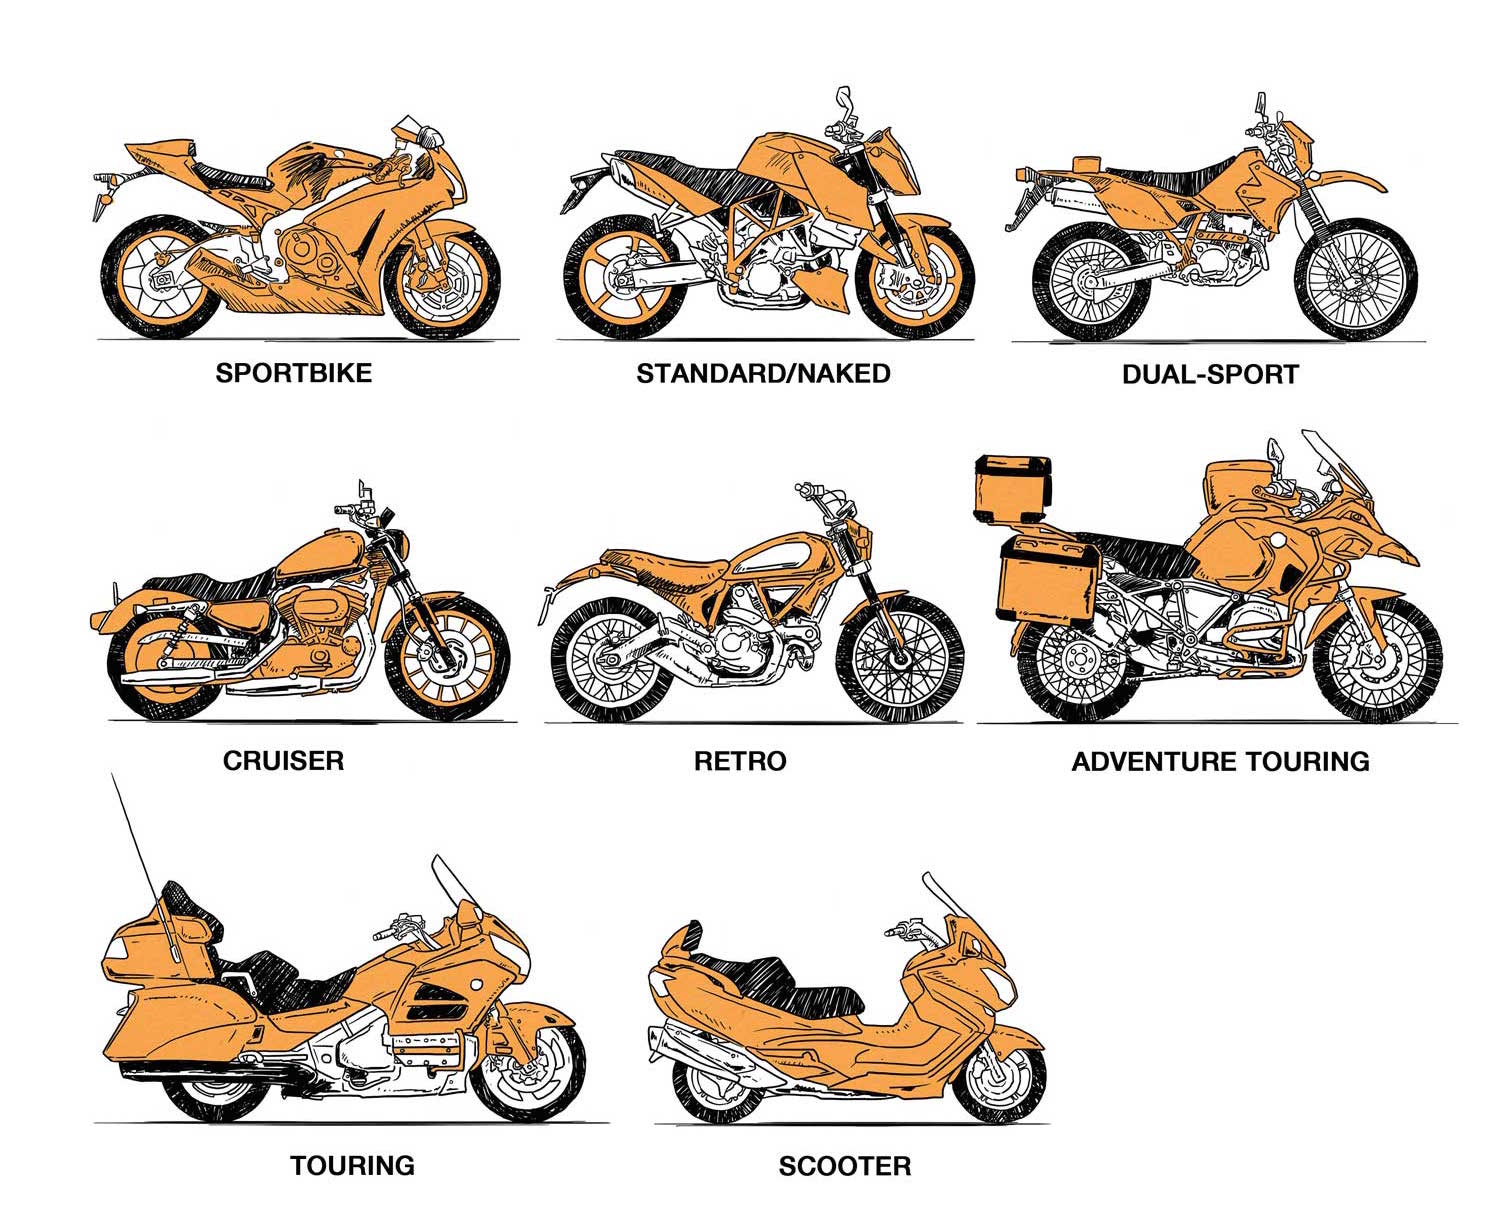 How To Choose The Right Type Of Motorcycle